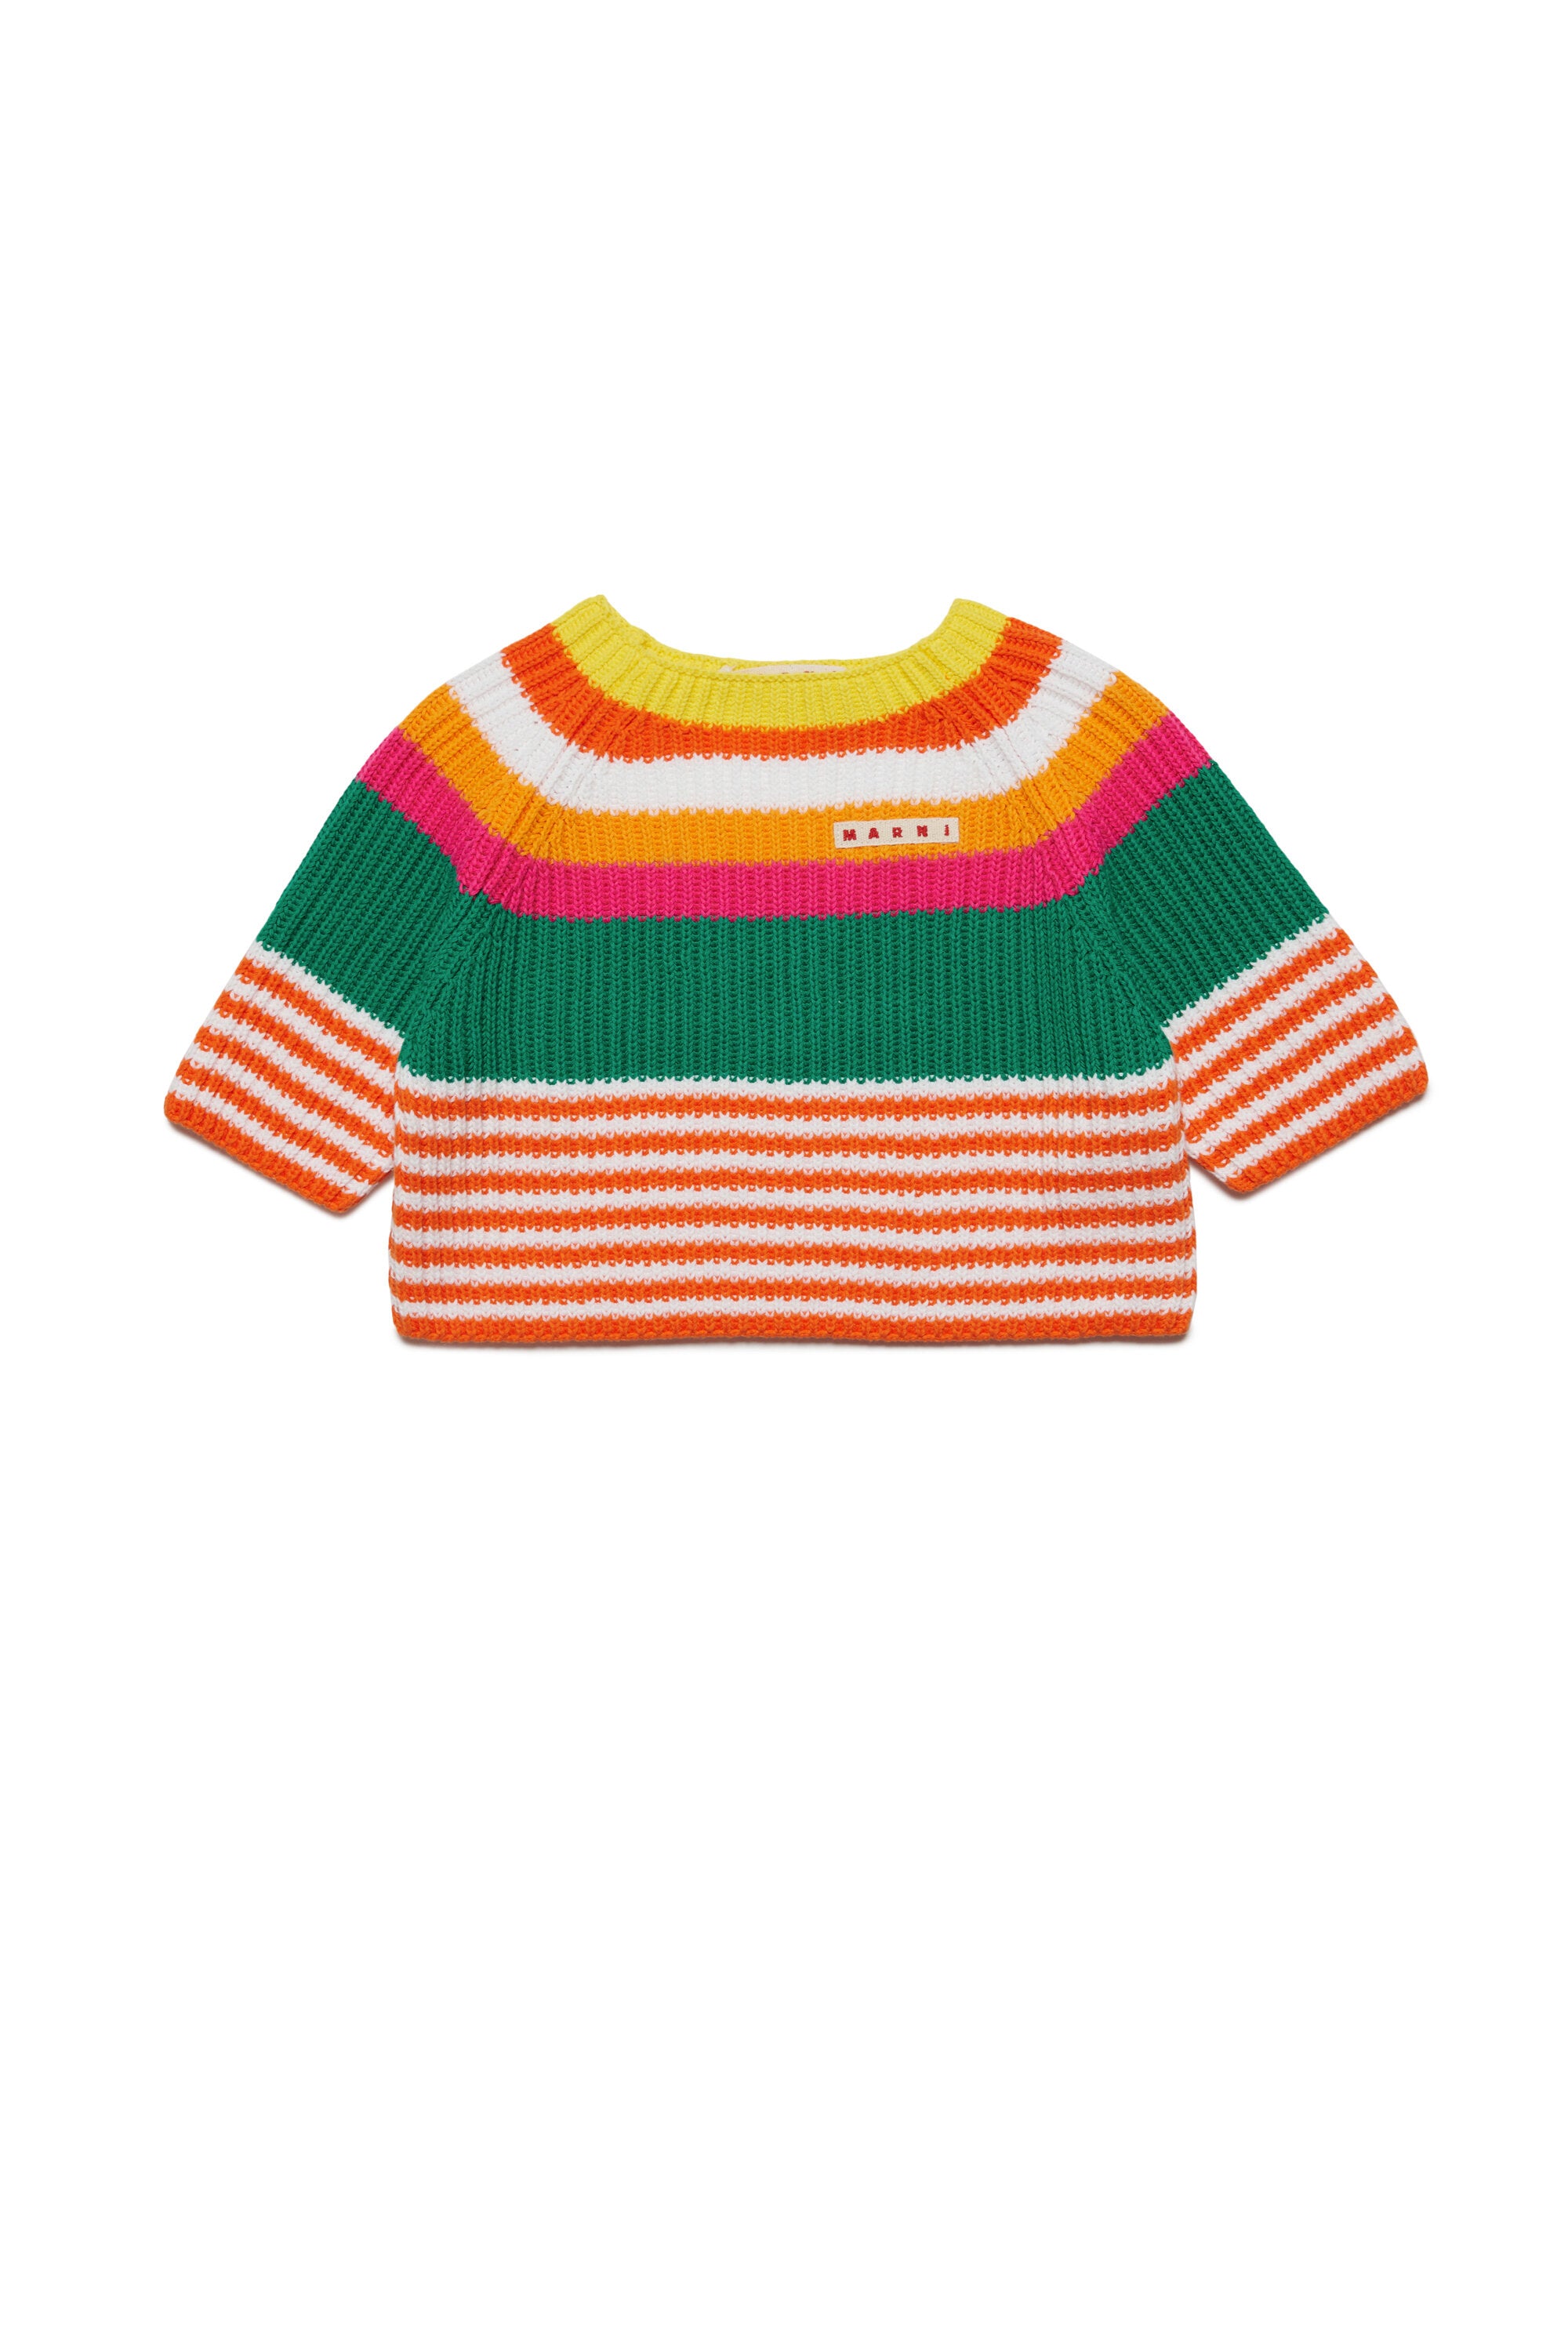 English striped knit pullover